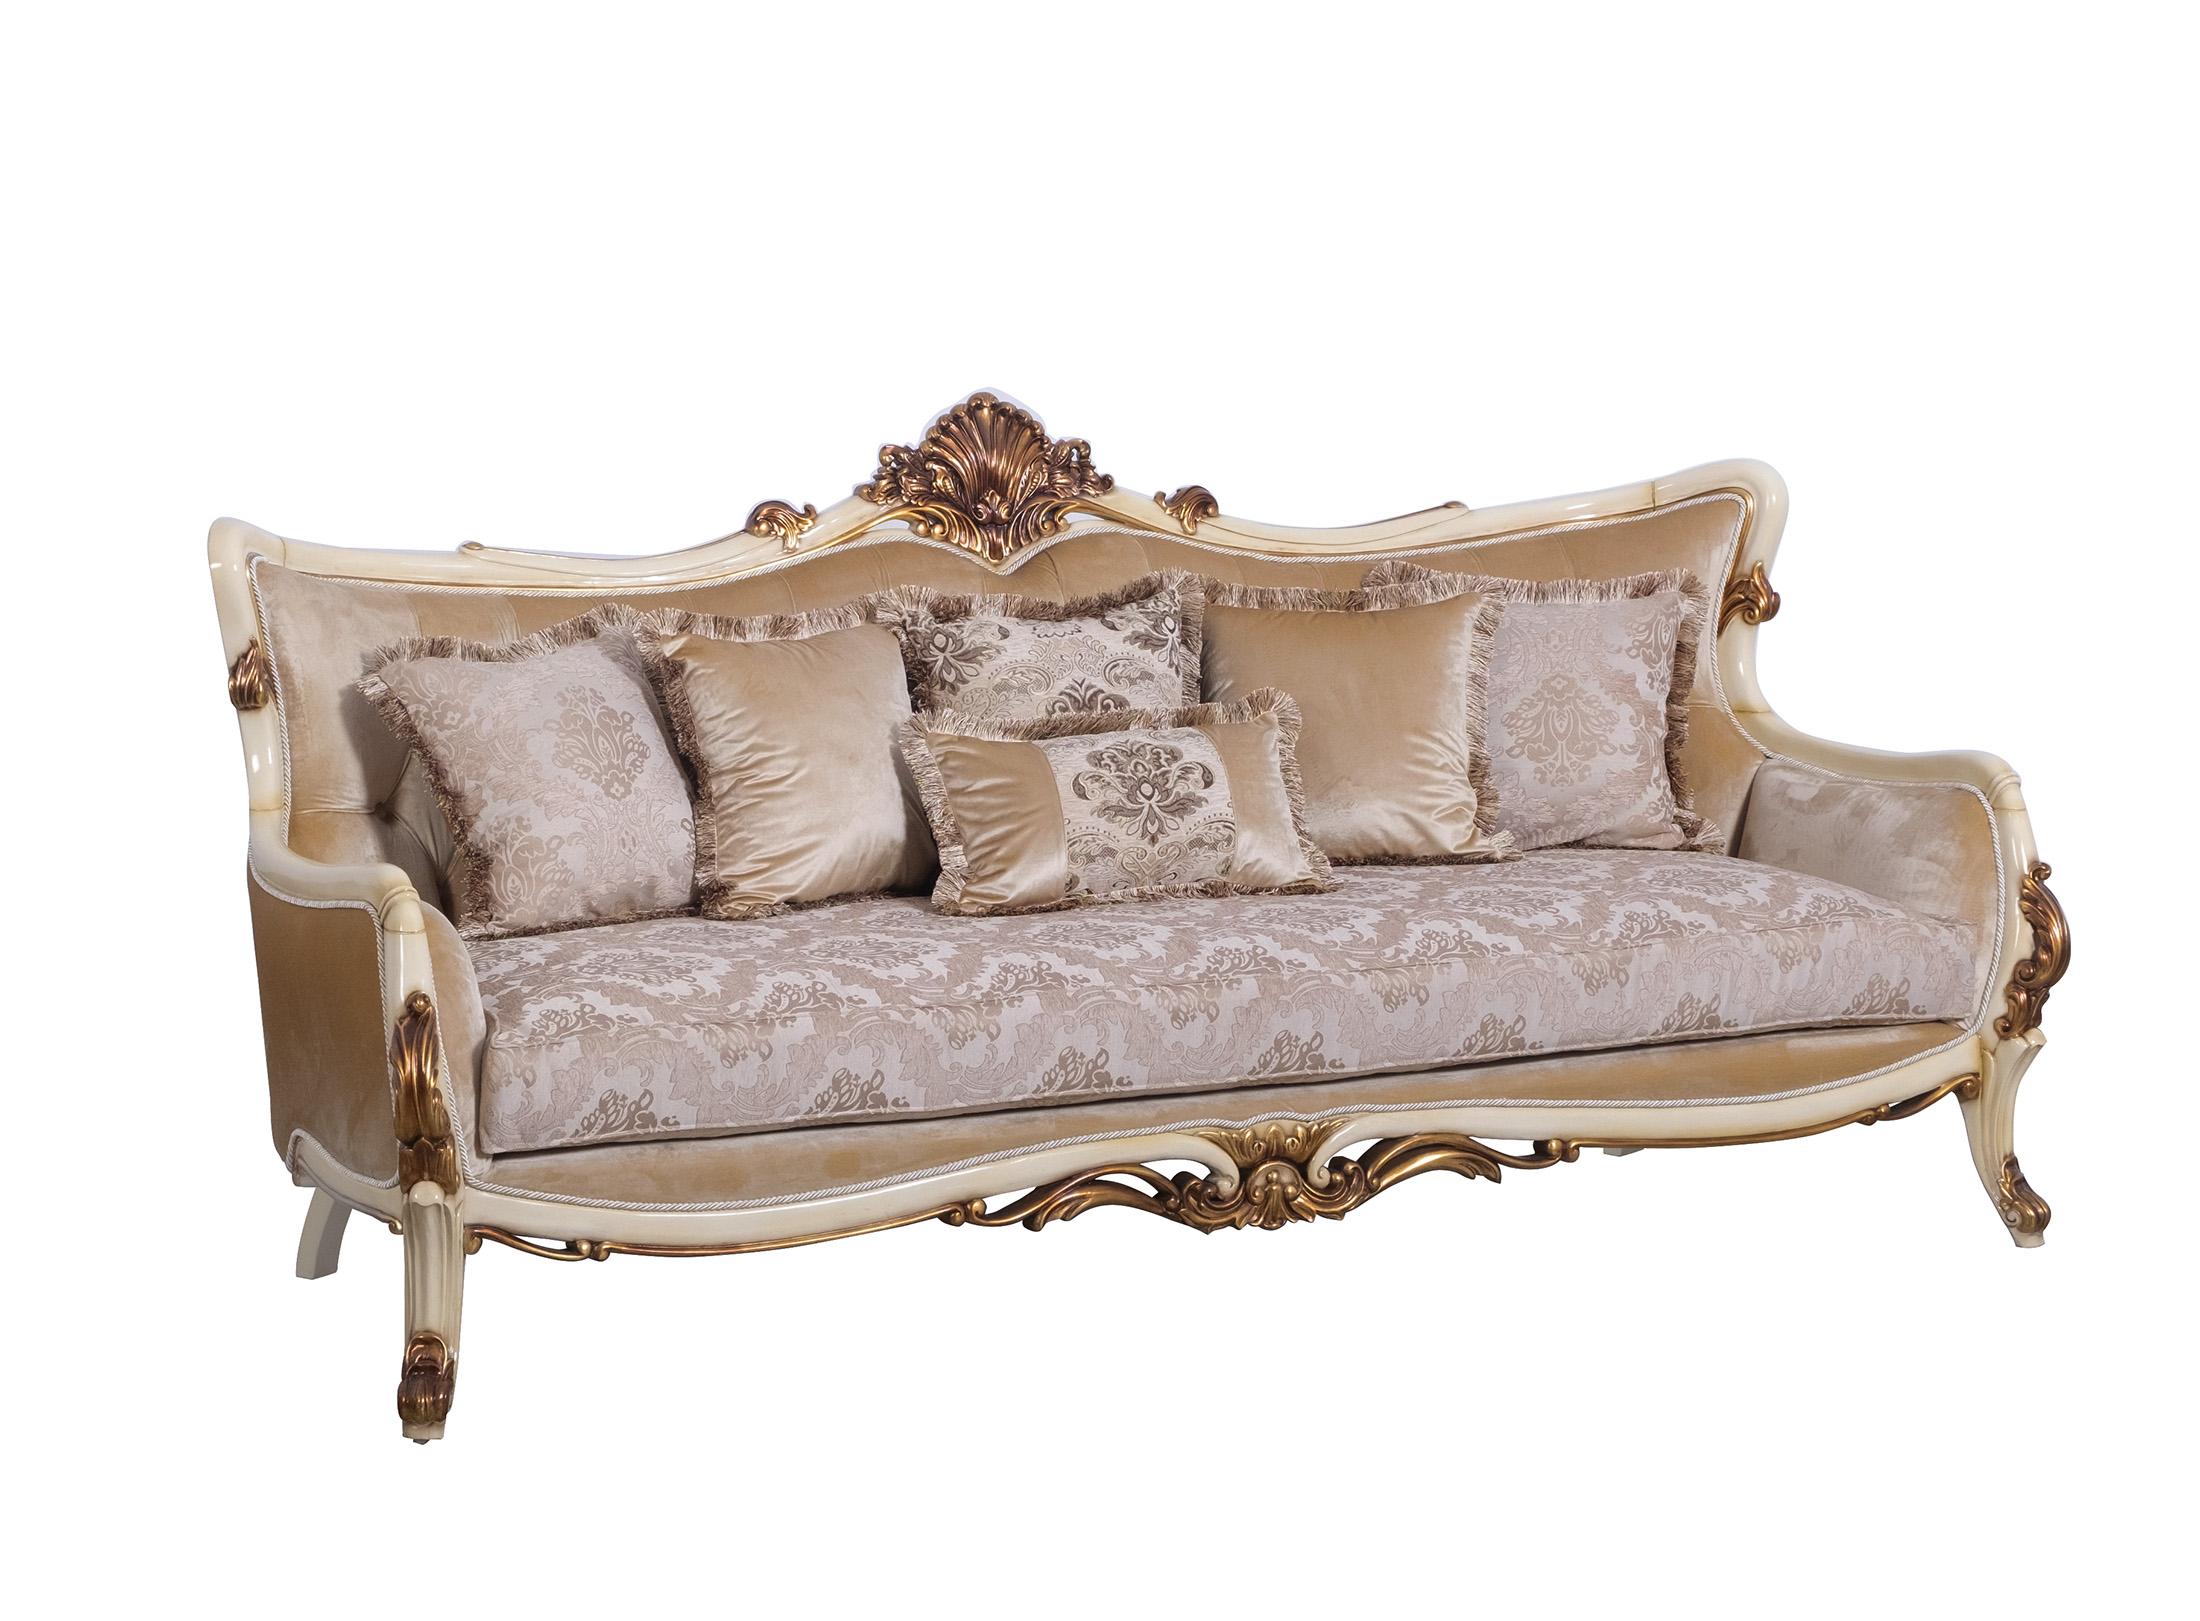 Classic, Traditional Sofa VERONICA 47075-S in Antique, Gold, Beige Fabric